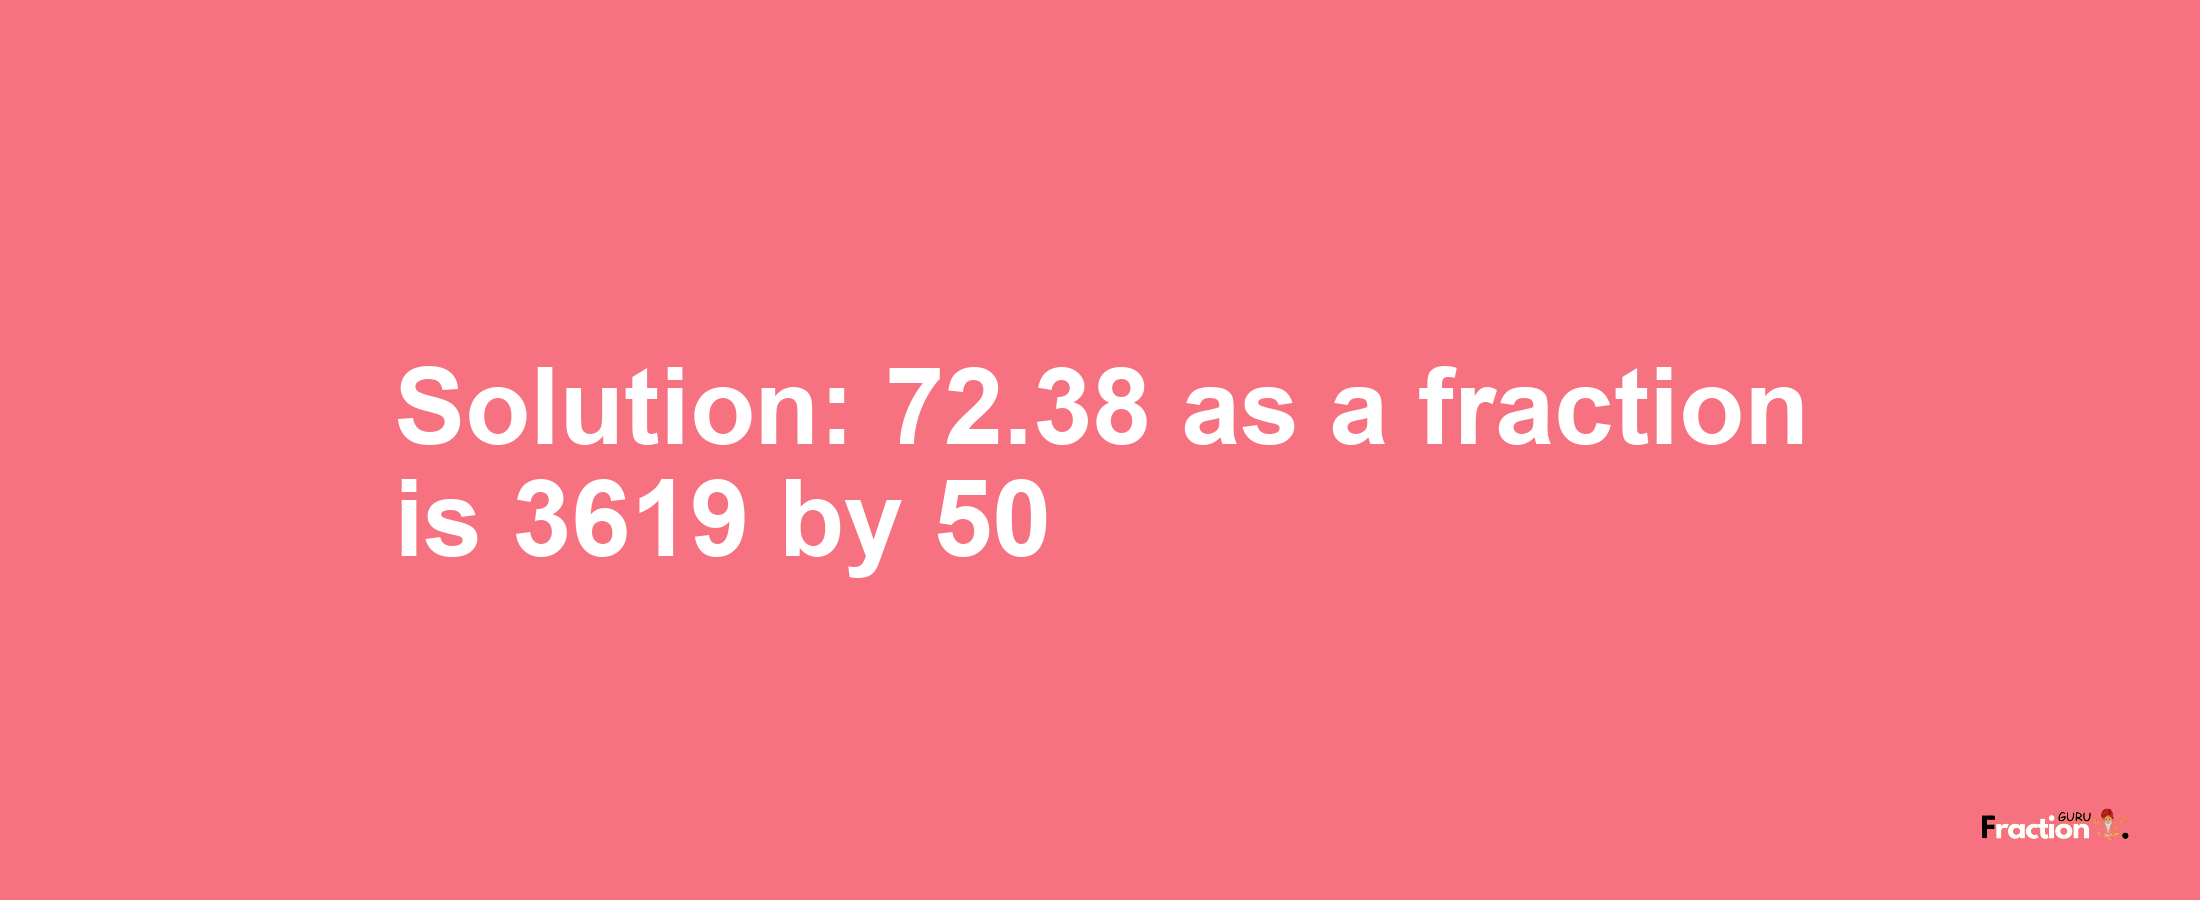 Solution:72.38 as a fraction is 3619/50